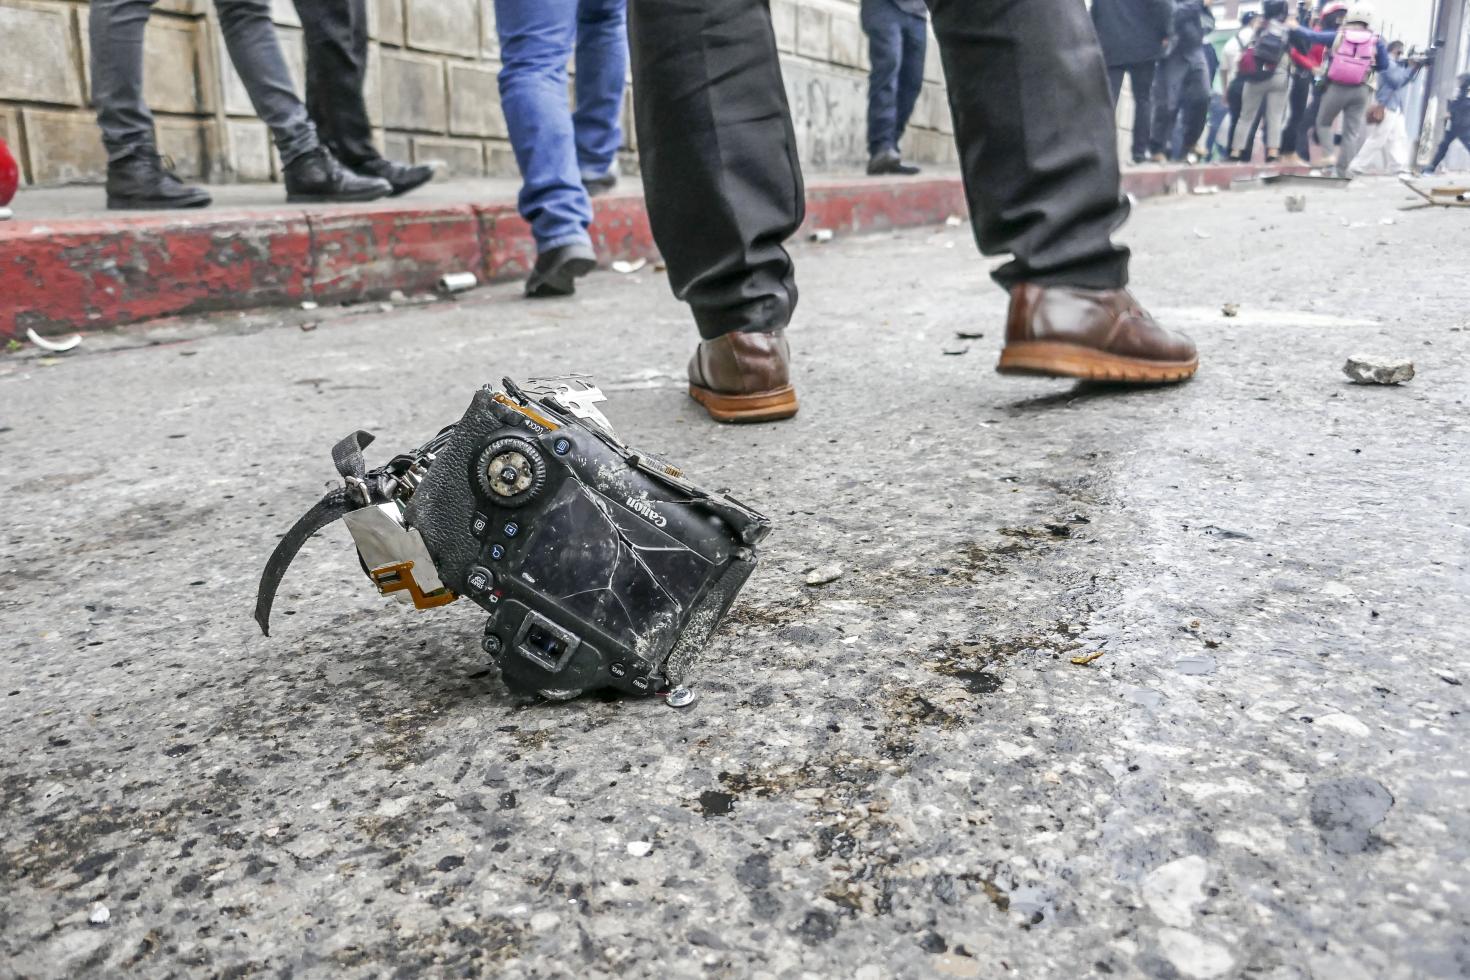 Broken camera of José Sanchinelli, reporter from a local newspaper who was attacked during riots.